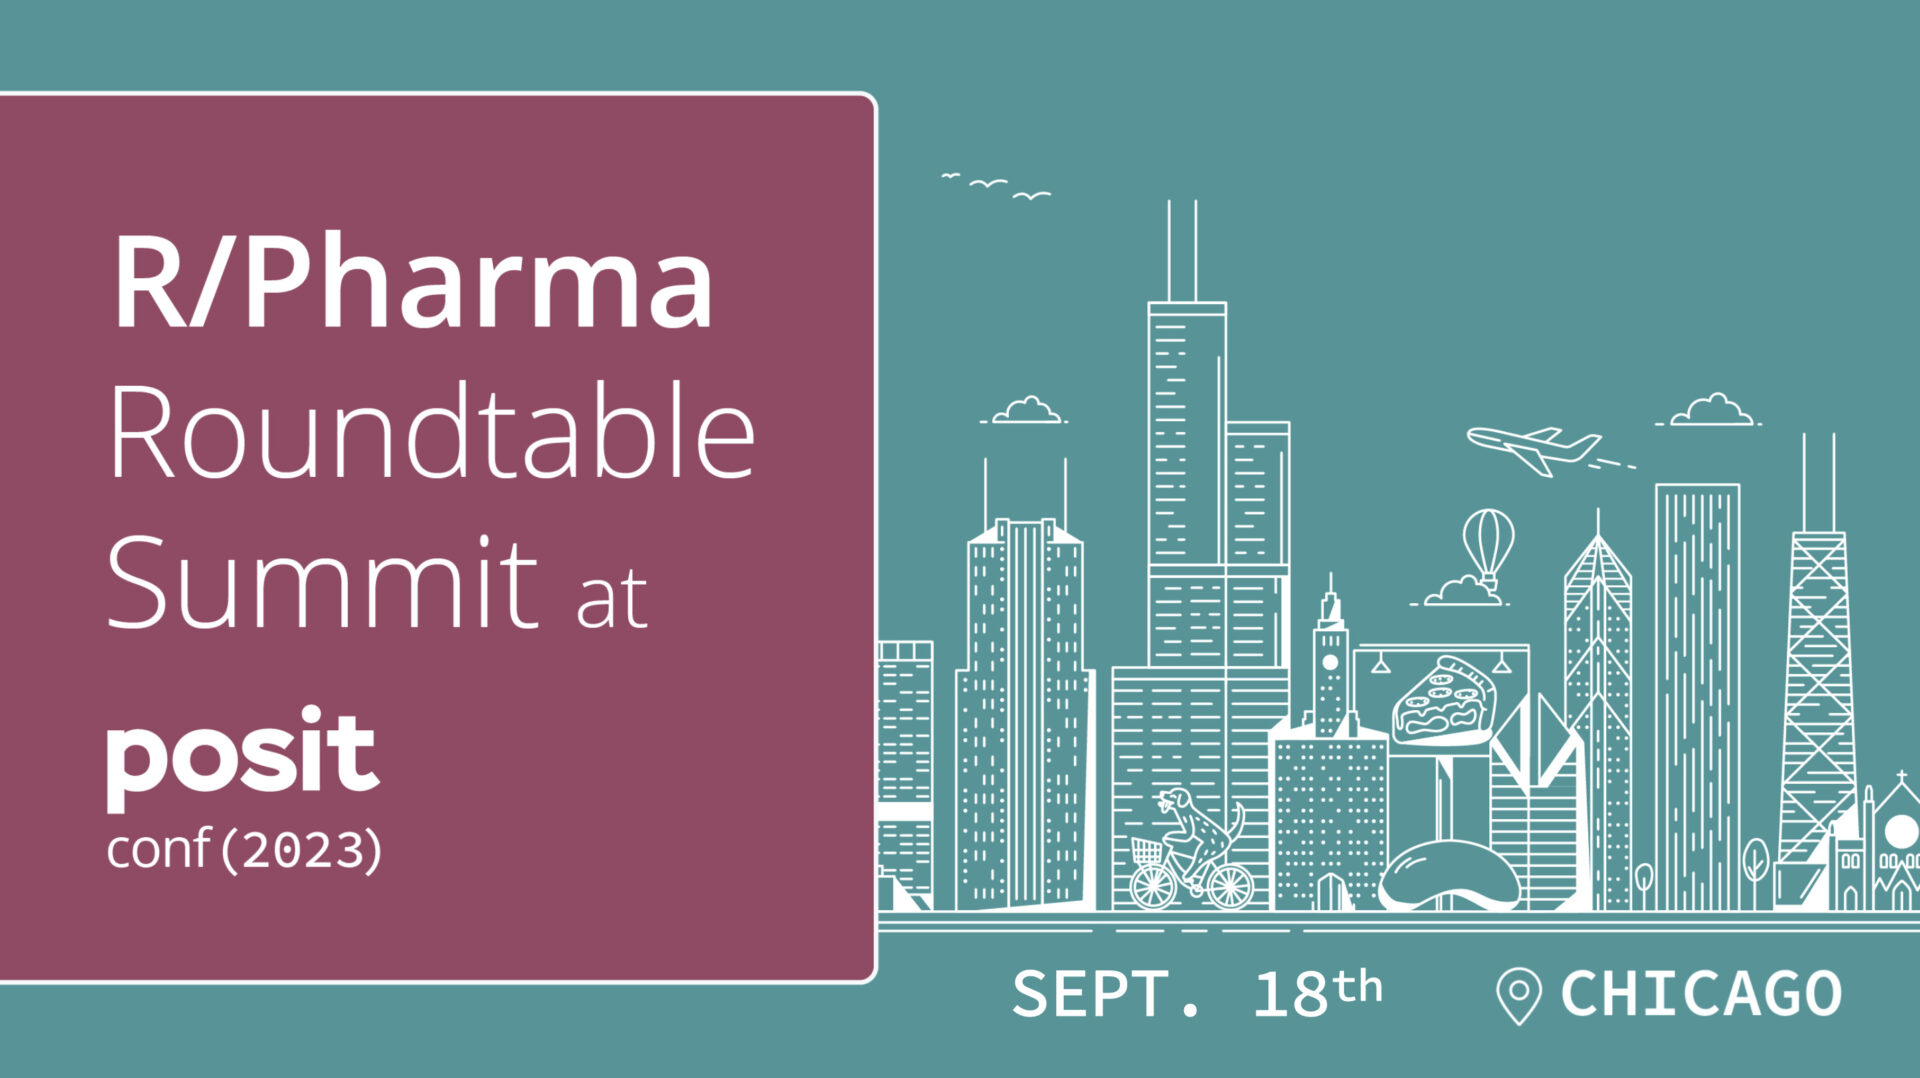 Text: R/Pharma Roundtable Summit at posit conf 2023. Sept 18 Chicago. A cartoon outline of the Chicago skyline.